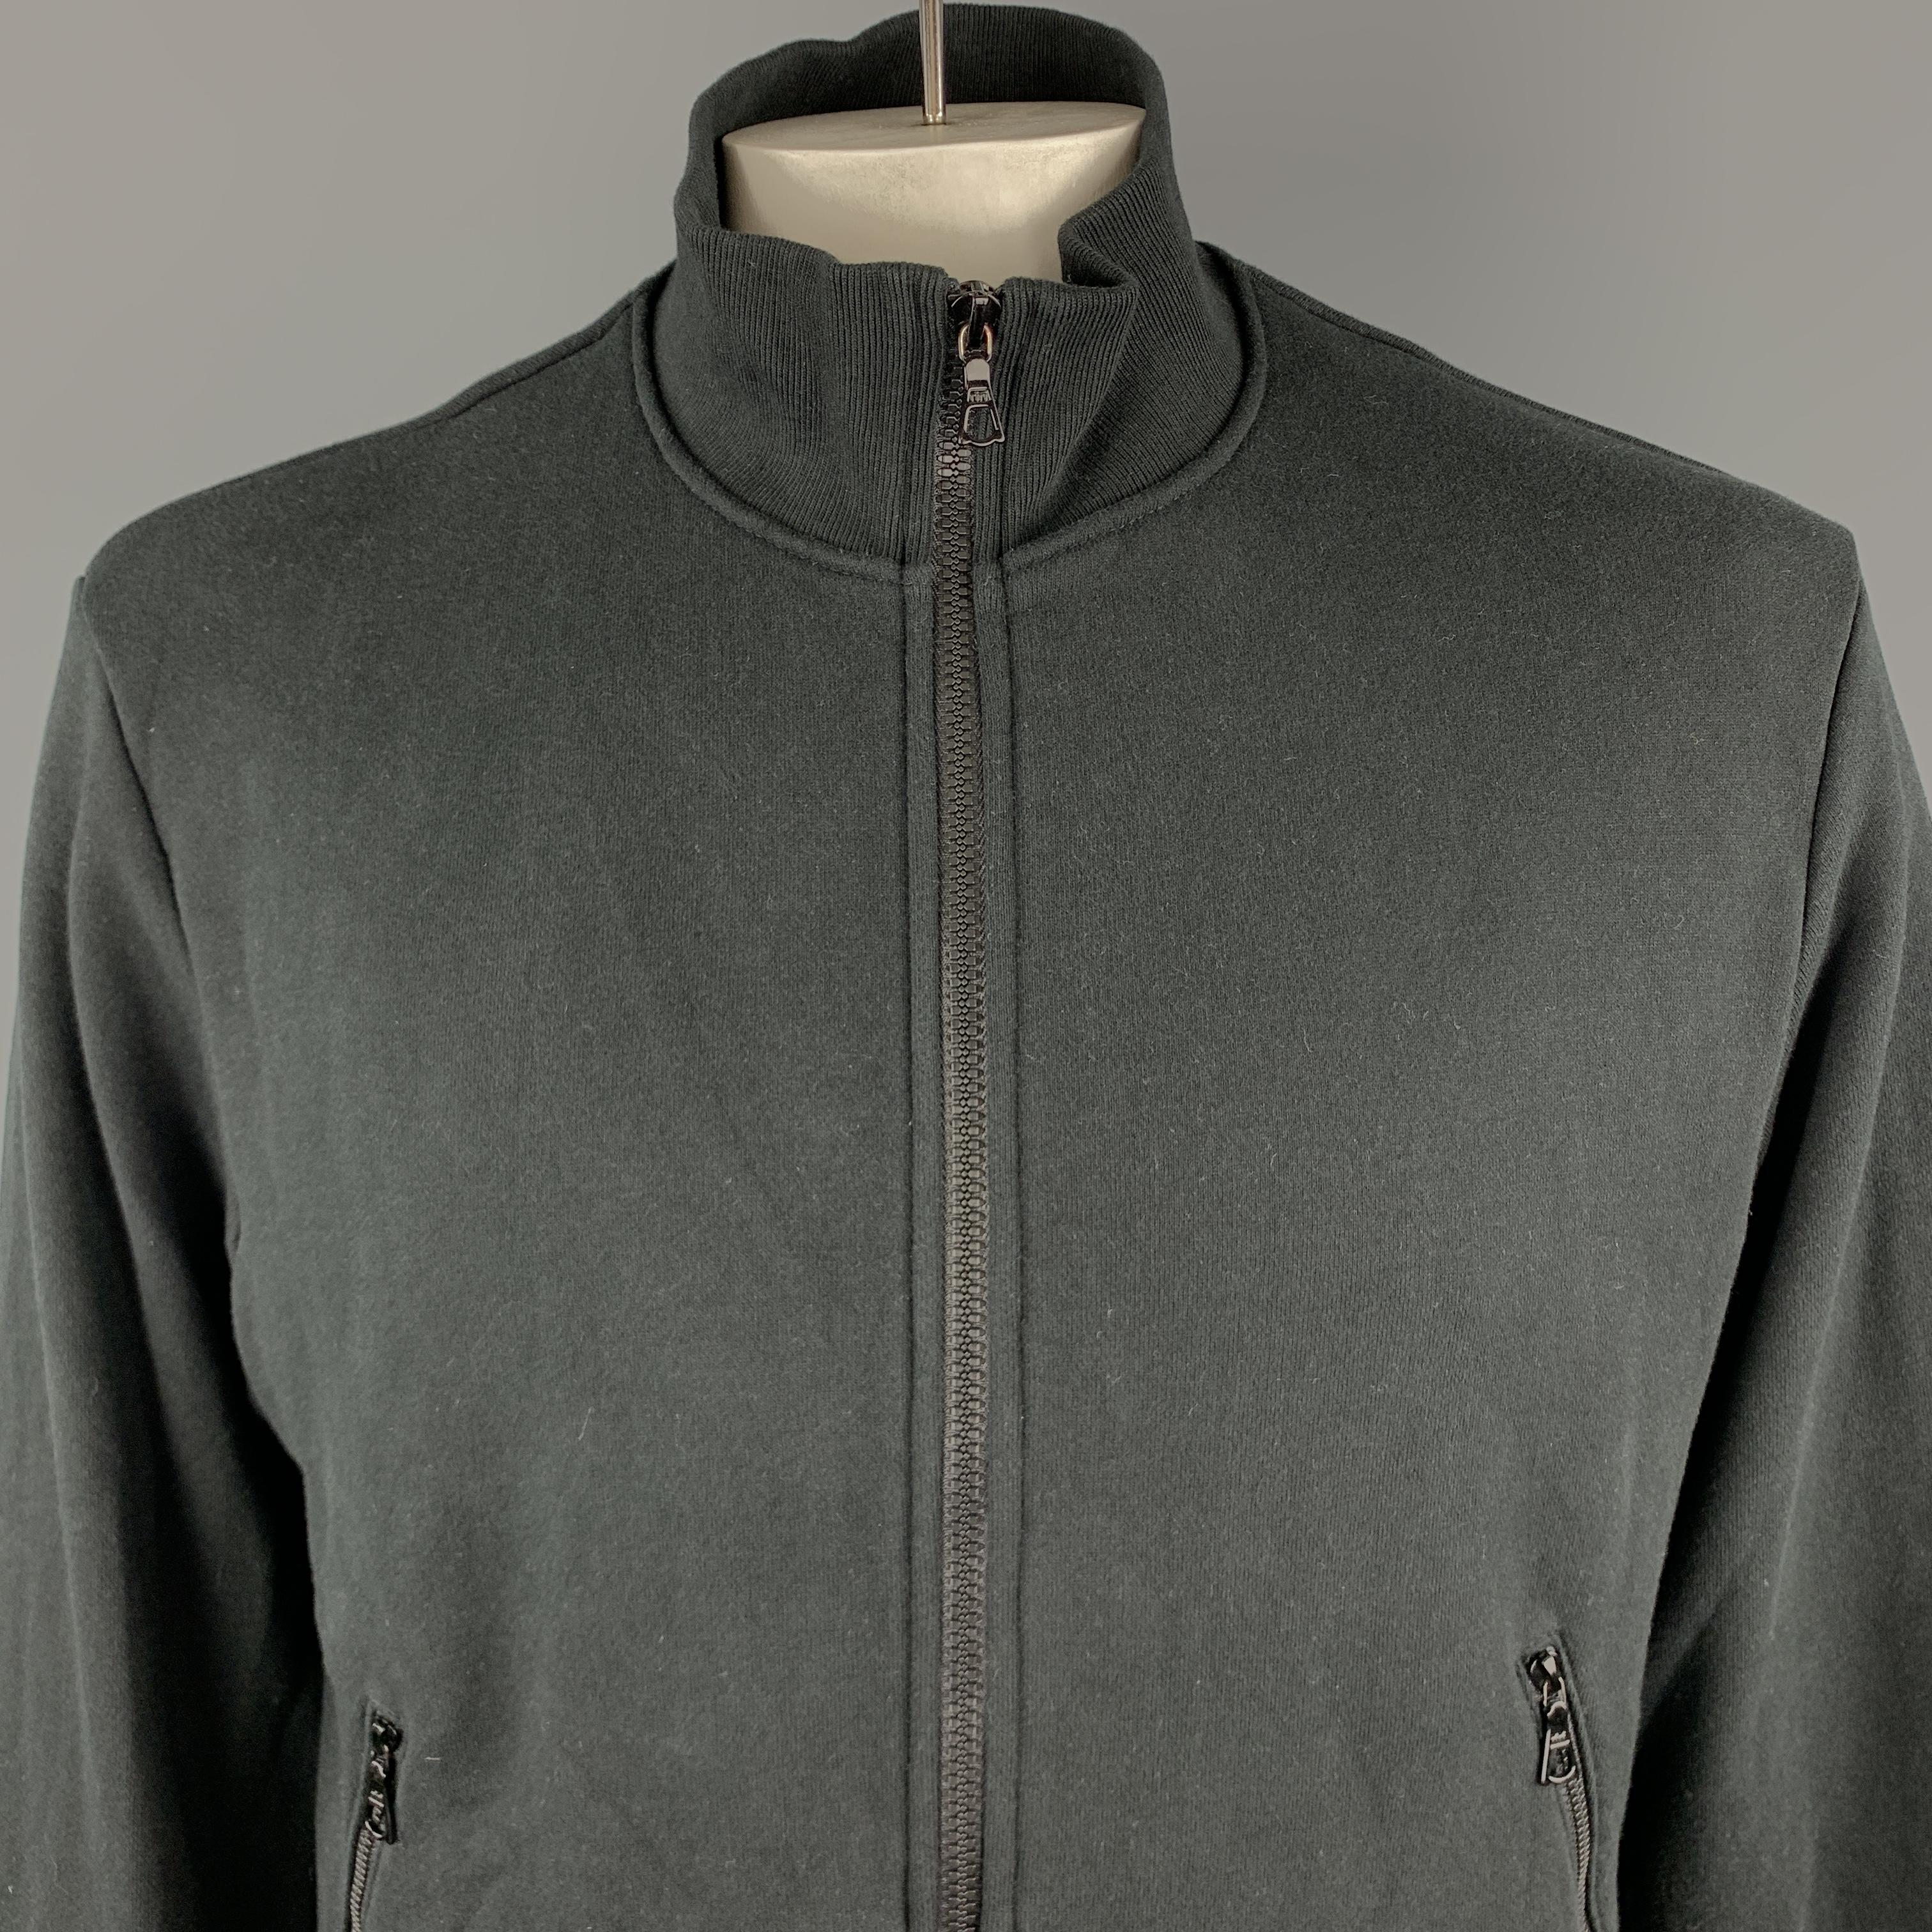 JOHN ELLIOTT Jacket comes in a black solid cotton material, with a high collar, zip pockets, trim at hem, ribbed high collar and cuffs, zip up. Made in USA.

Very Good Pre-Owned Condition.
Marked: 3 

Measurements:

Shoulder: 19 in. 
Chest: 47 in.